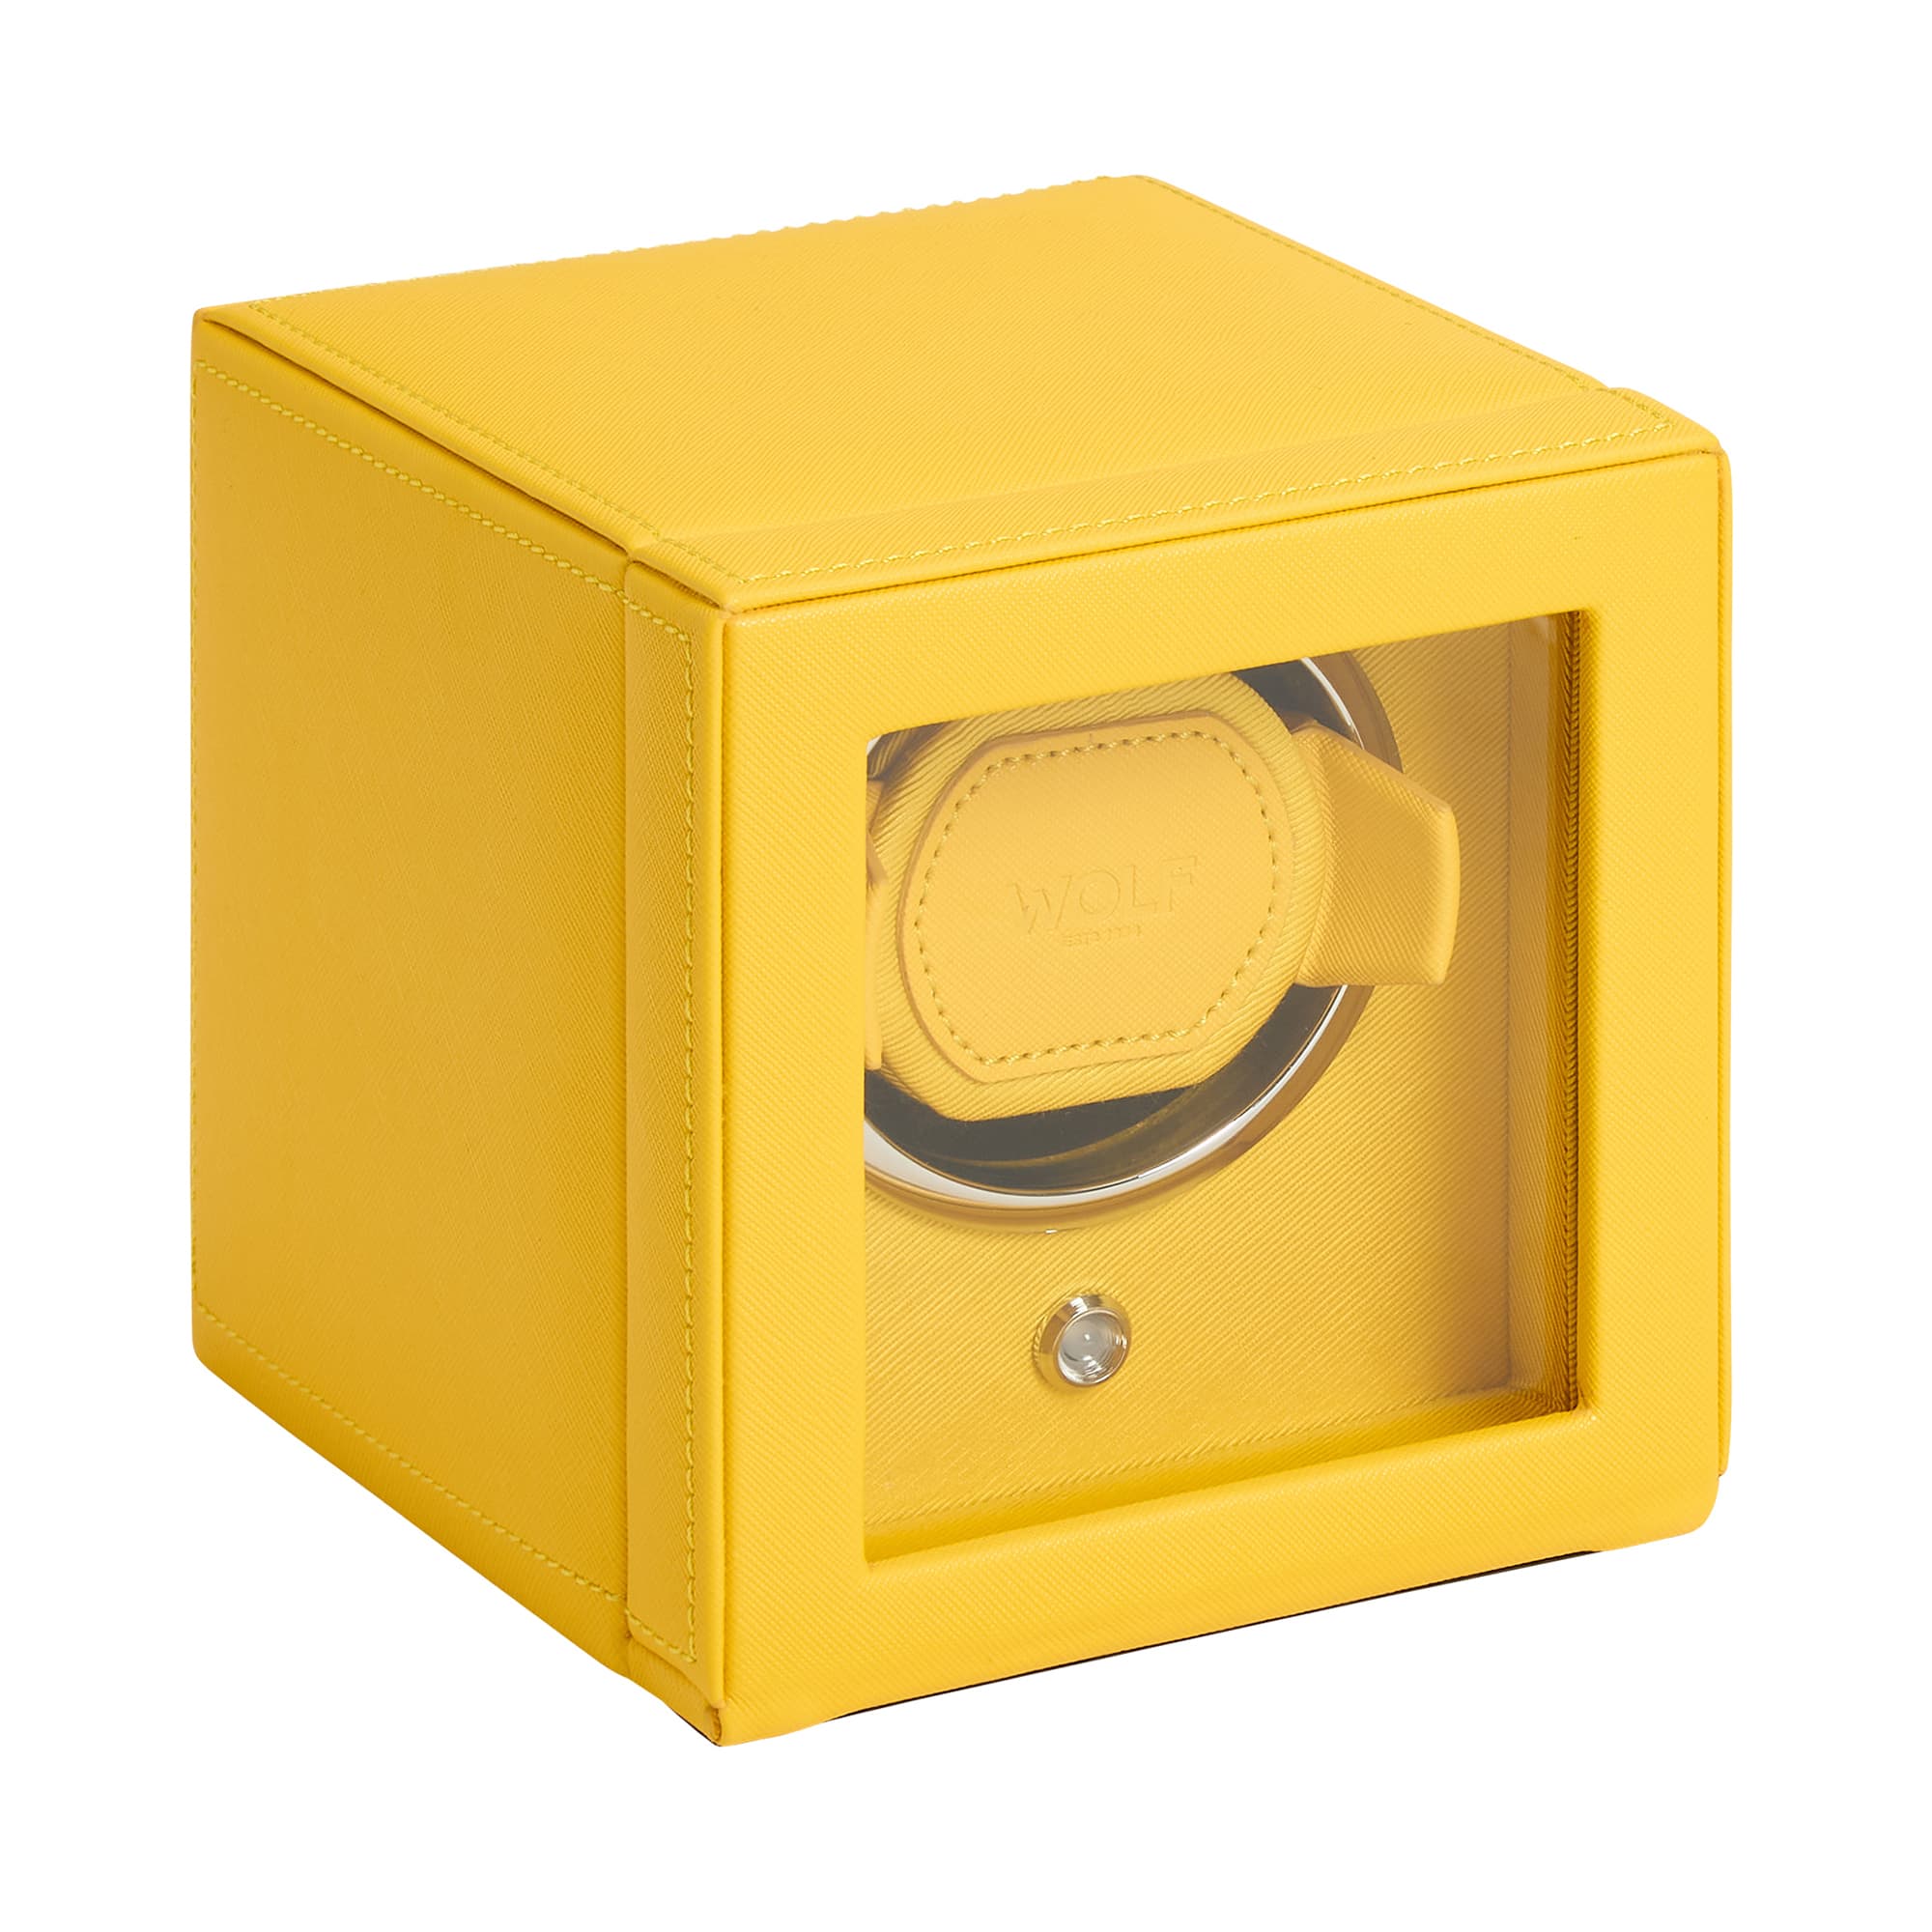 Wolf-Cub-Single-Watch-Winder-with-Cover-Yellow-461192-1